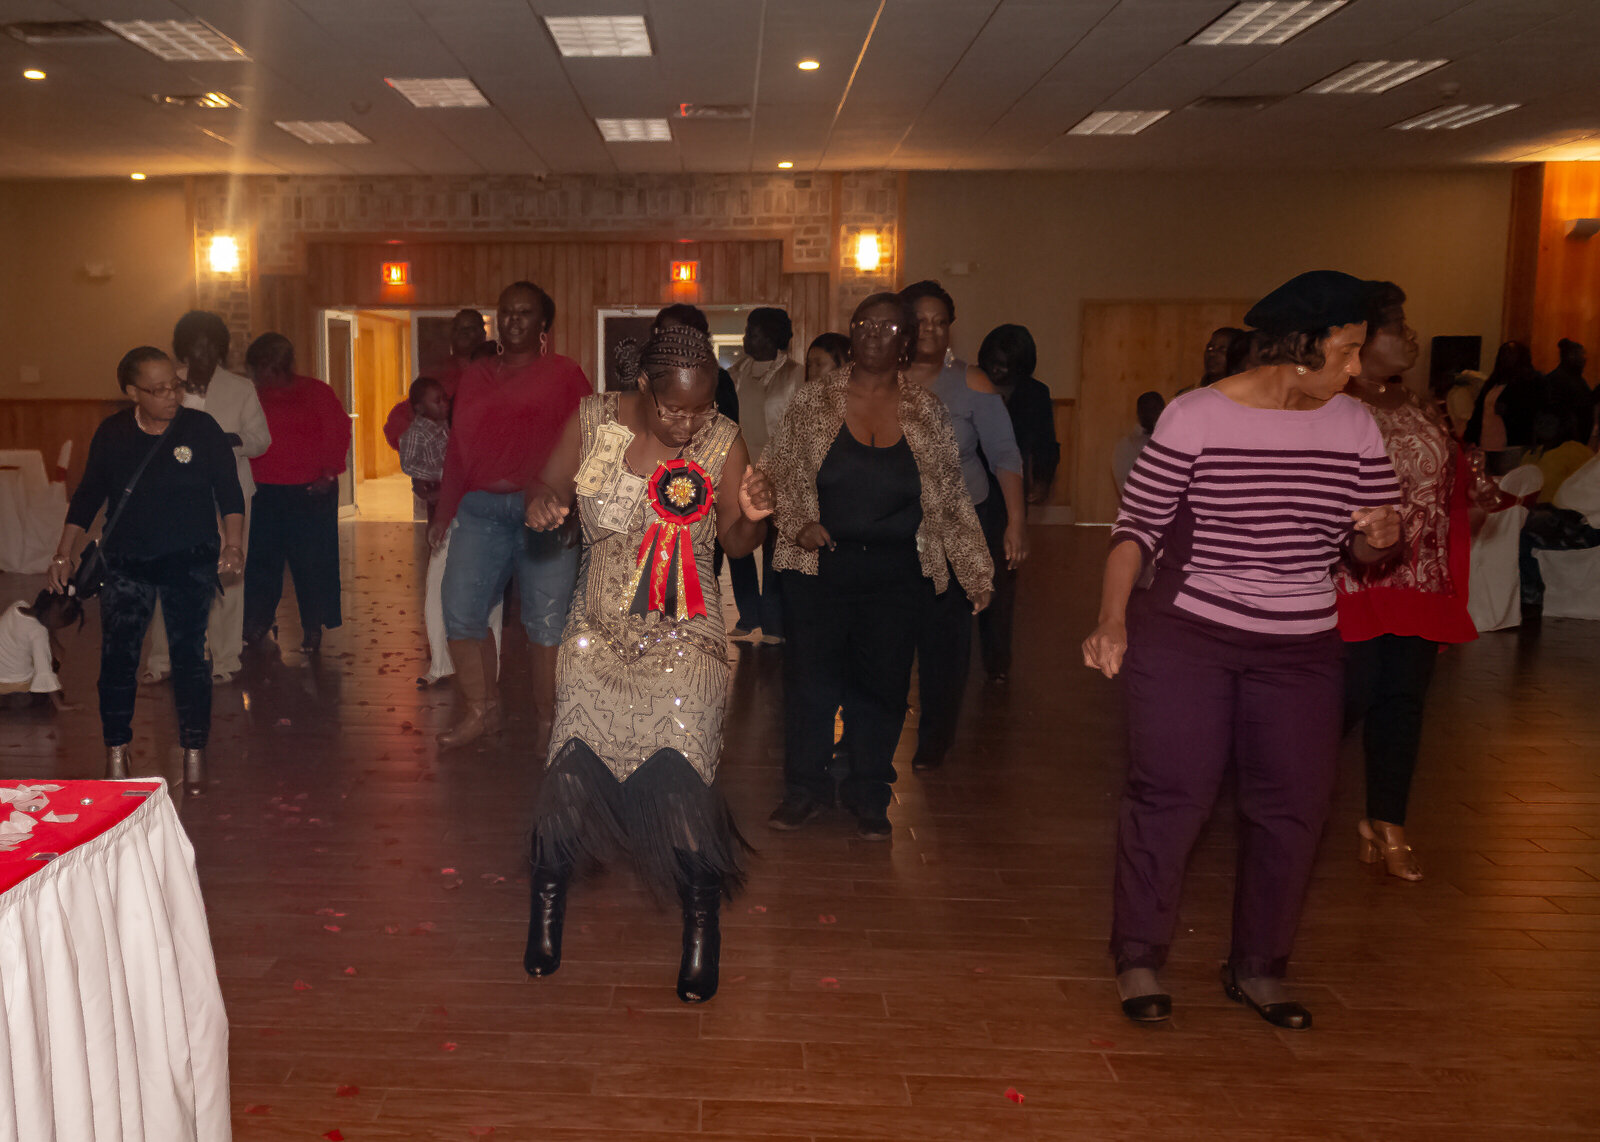 group of people dance on the dance floor during a party